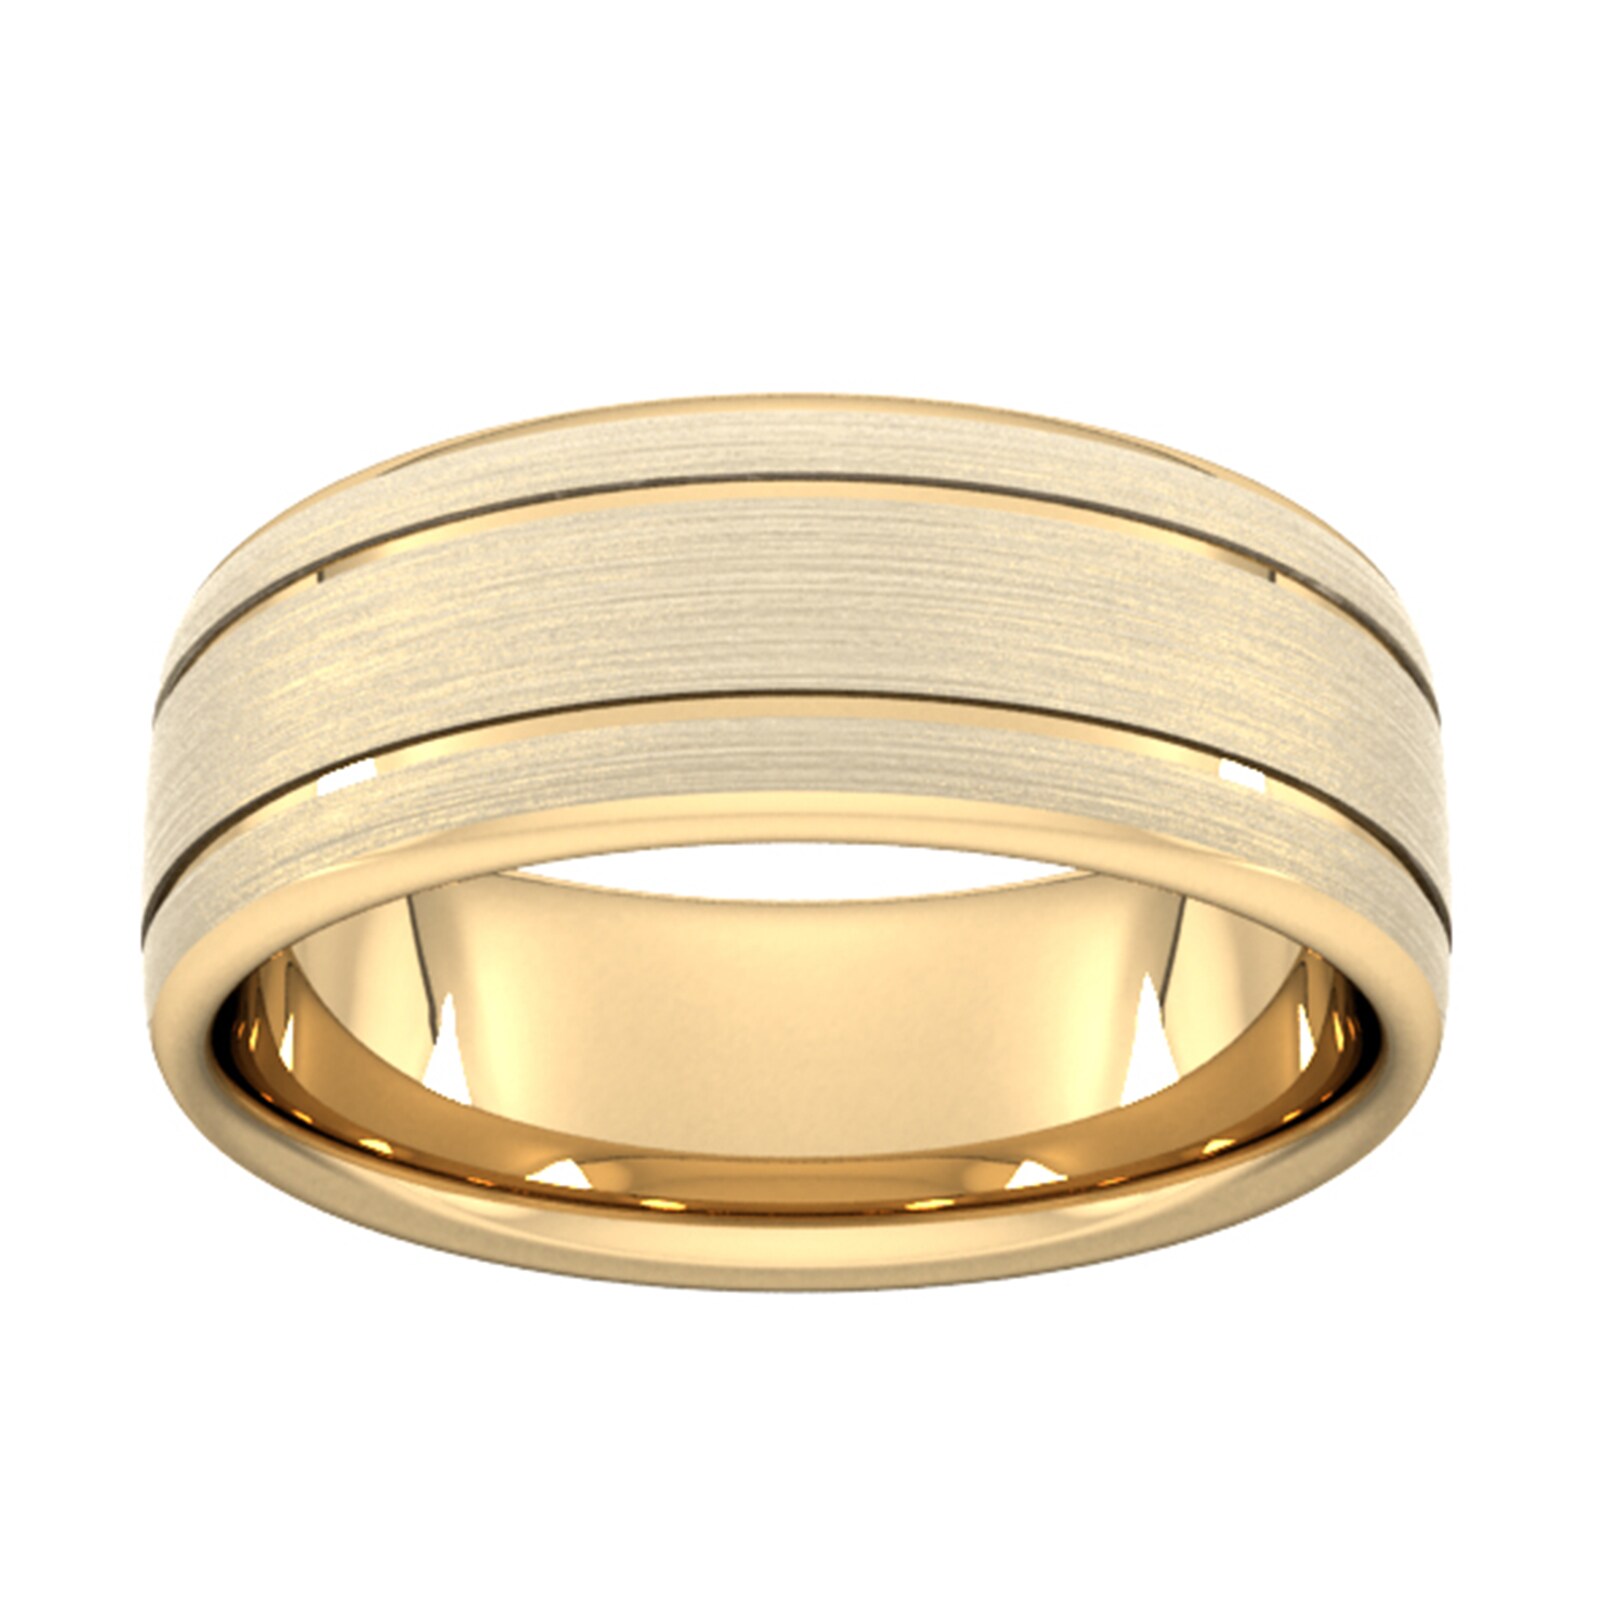 8mm Traditional Court Heavy Matt Finish With Double Grooves Wedding Ring In 18 Carat Yellow Gold - Ring Size R